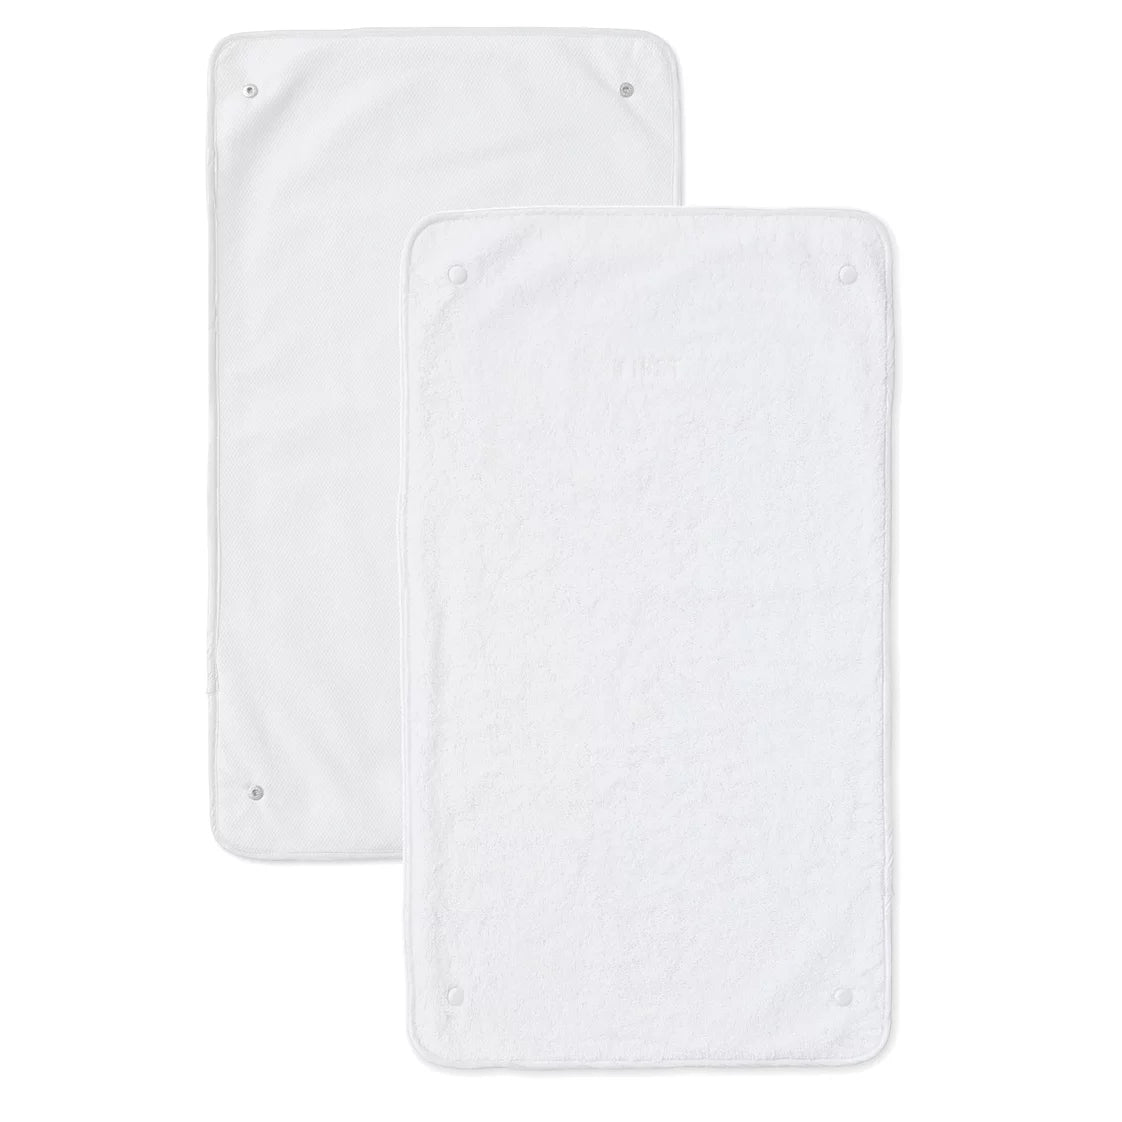 First Crystel White Changing Pad Extra Towels